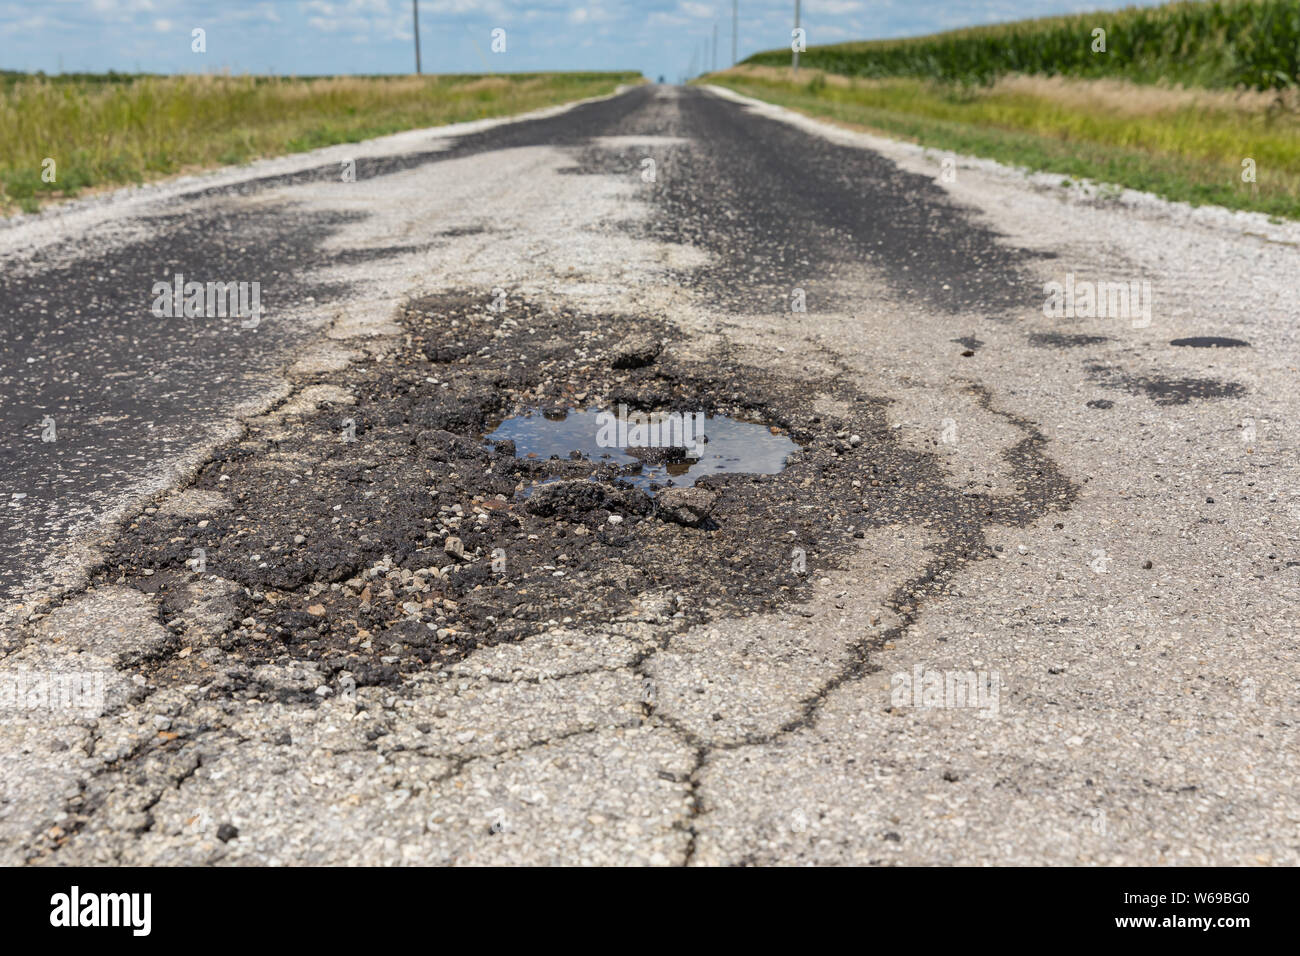 Pothole with water and cracks in a rural country road Stock Photo